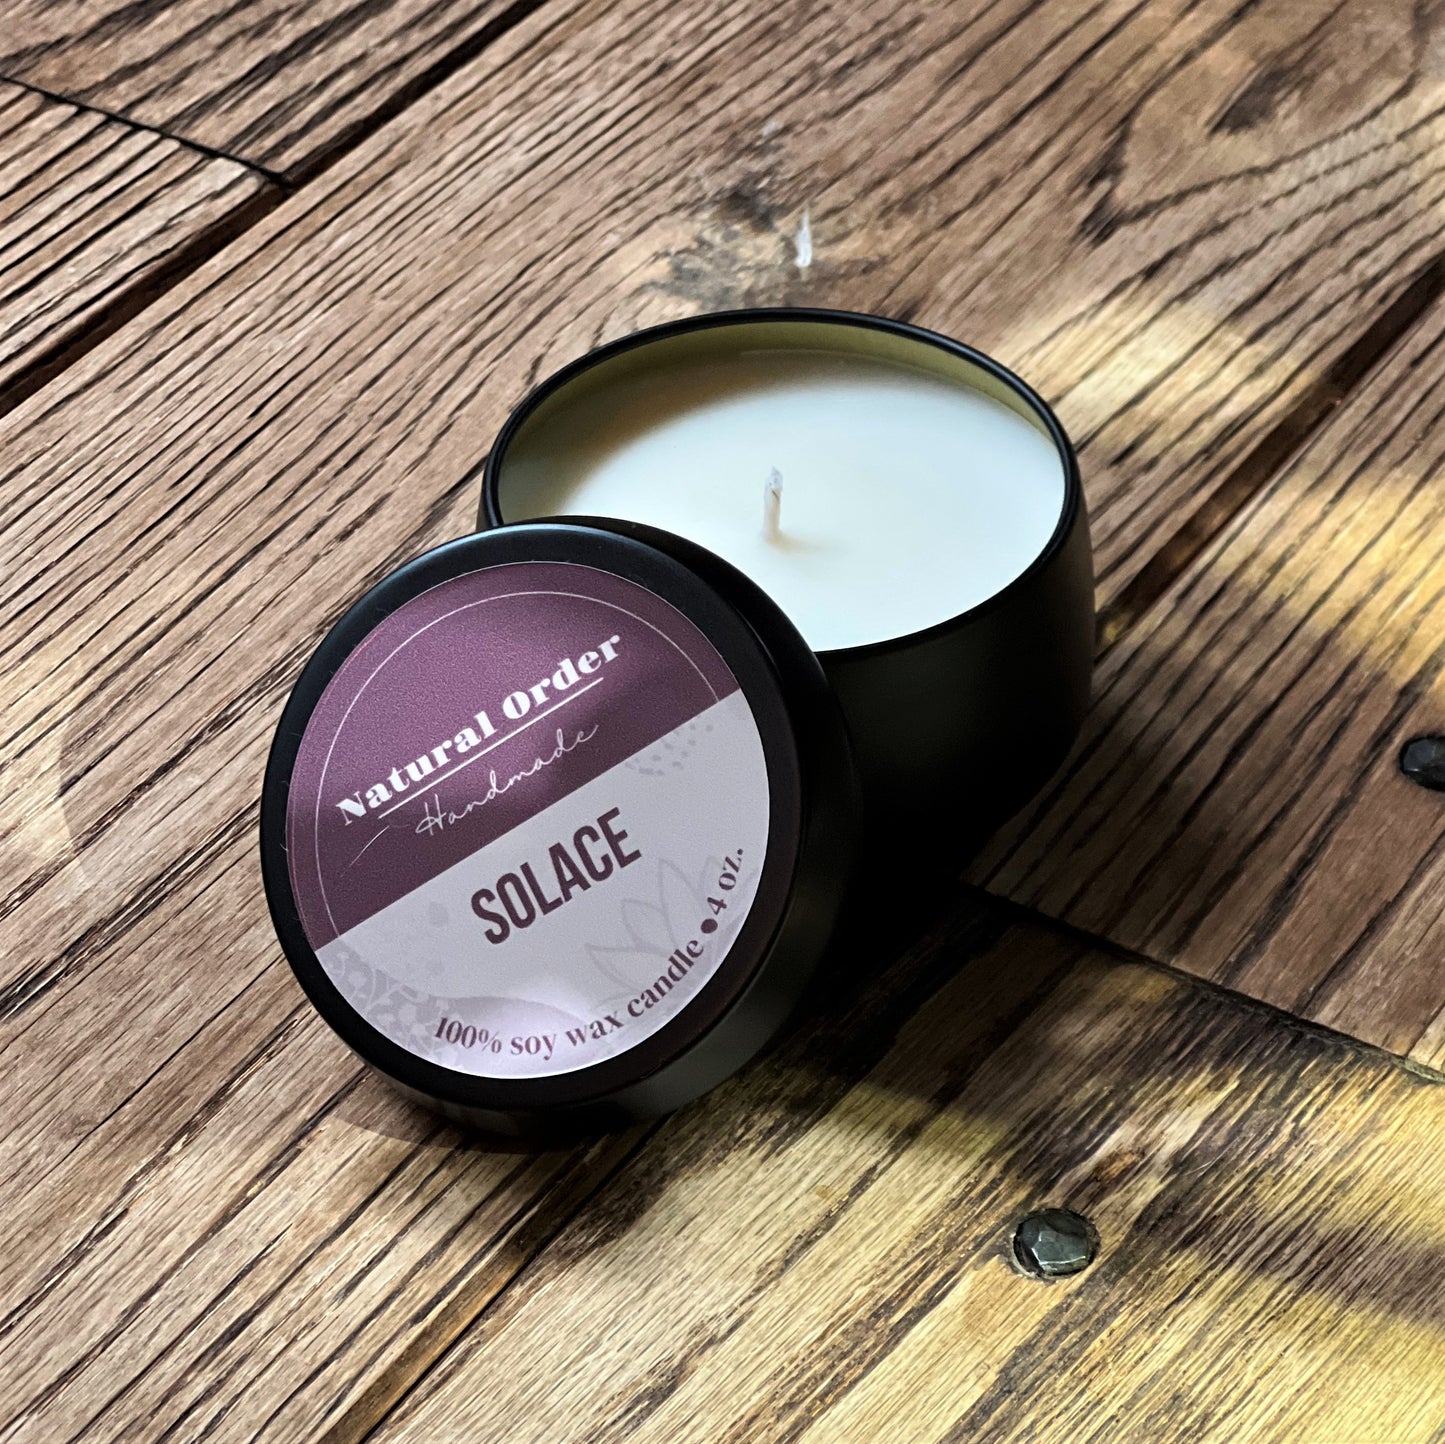 Solace Soy Candle, 4 ounce